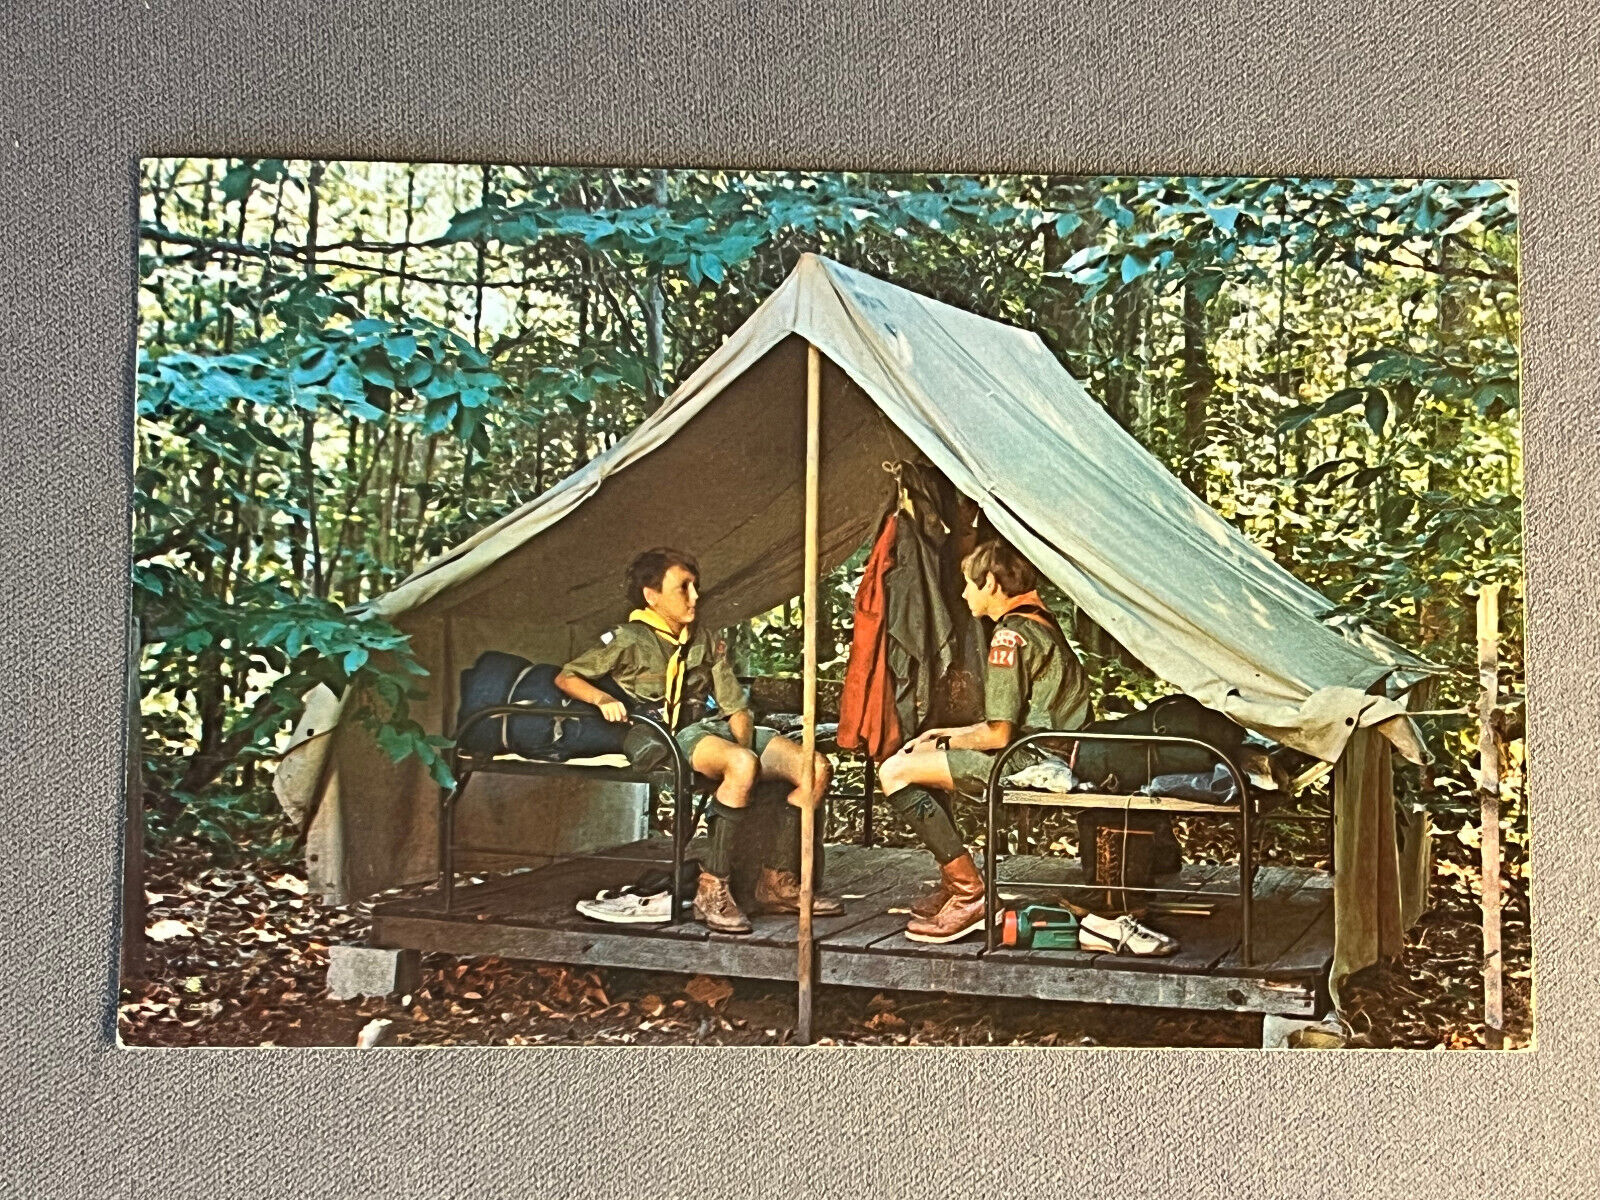 New York, NY, Massawepie Scout Camps, 2 Boyscouts In Tent,  PM 1976